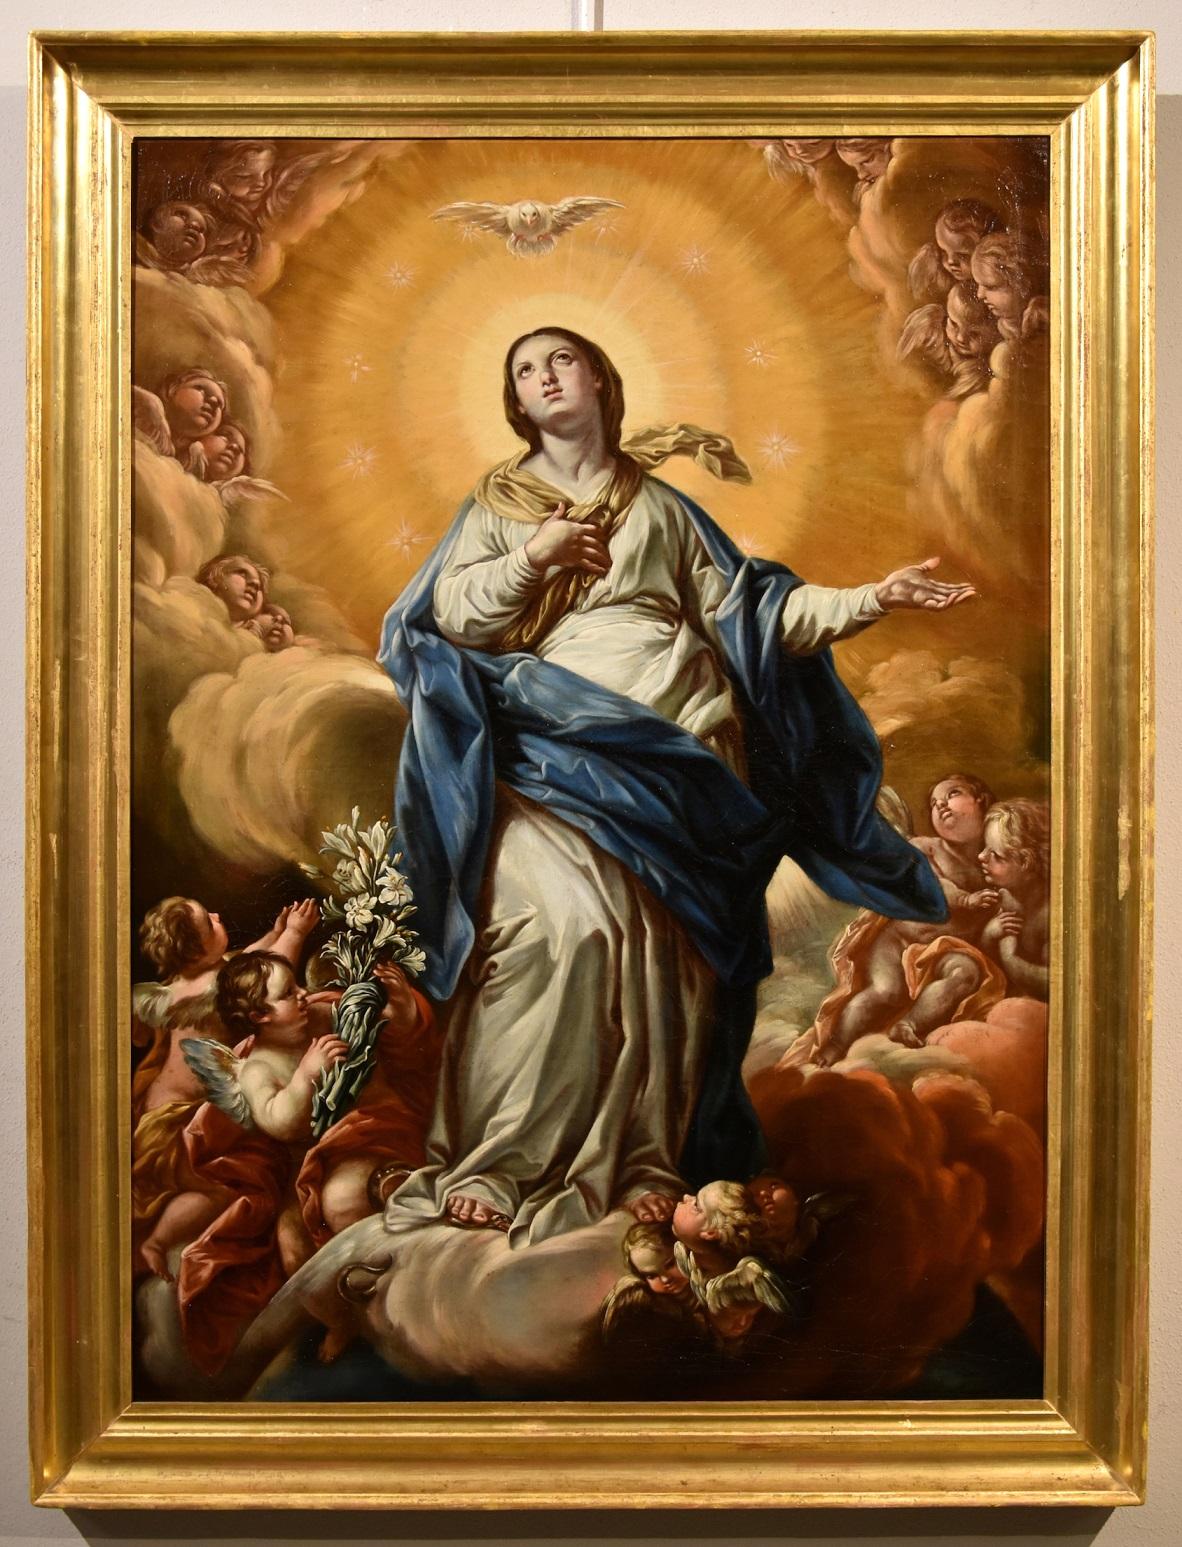 Immaculate Virgin Madonna Brandi Paint Oil on canvas Old master 17th Century Art - Painting by Giacinto Brandi (Rome 1621 - Rome 1691)